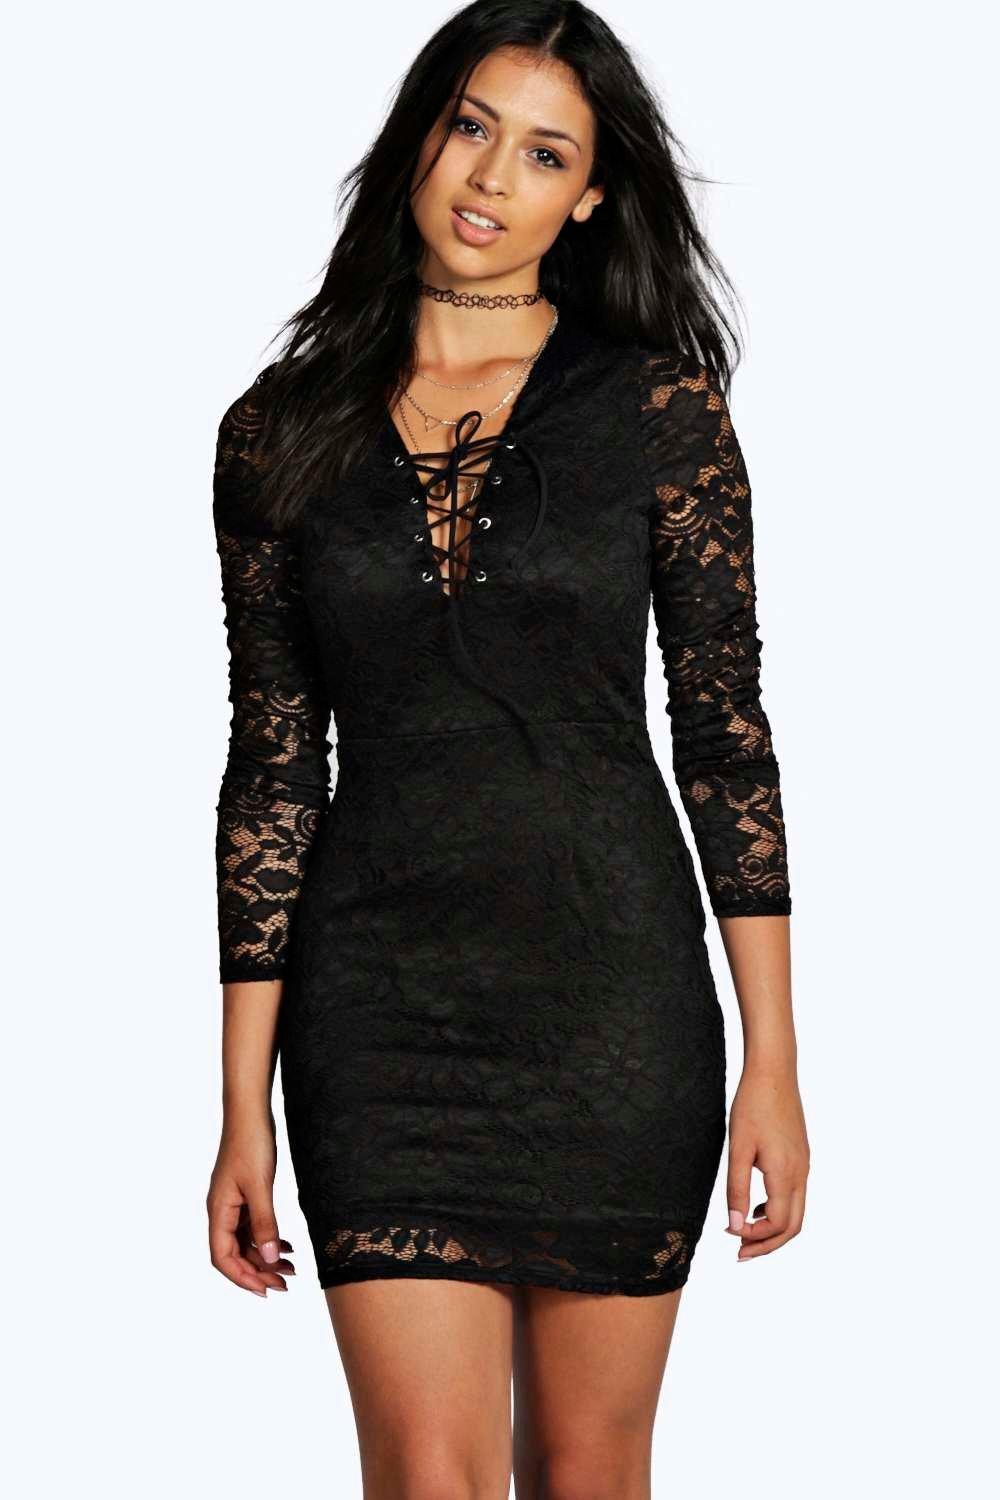 Venus All Over Lace Tie Detail Bodycon Dress at boohoo.com